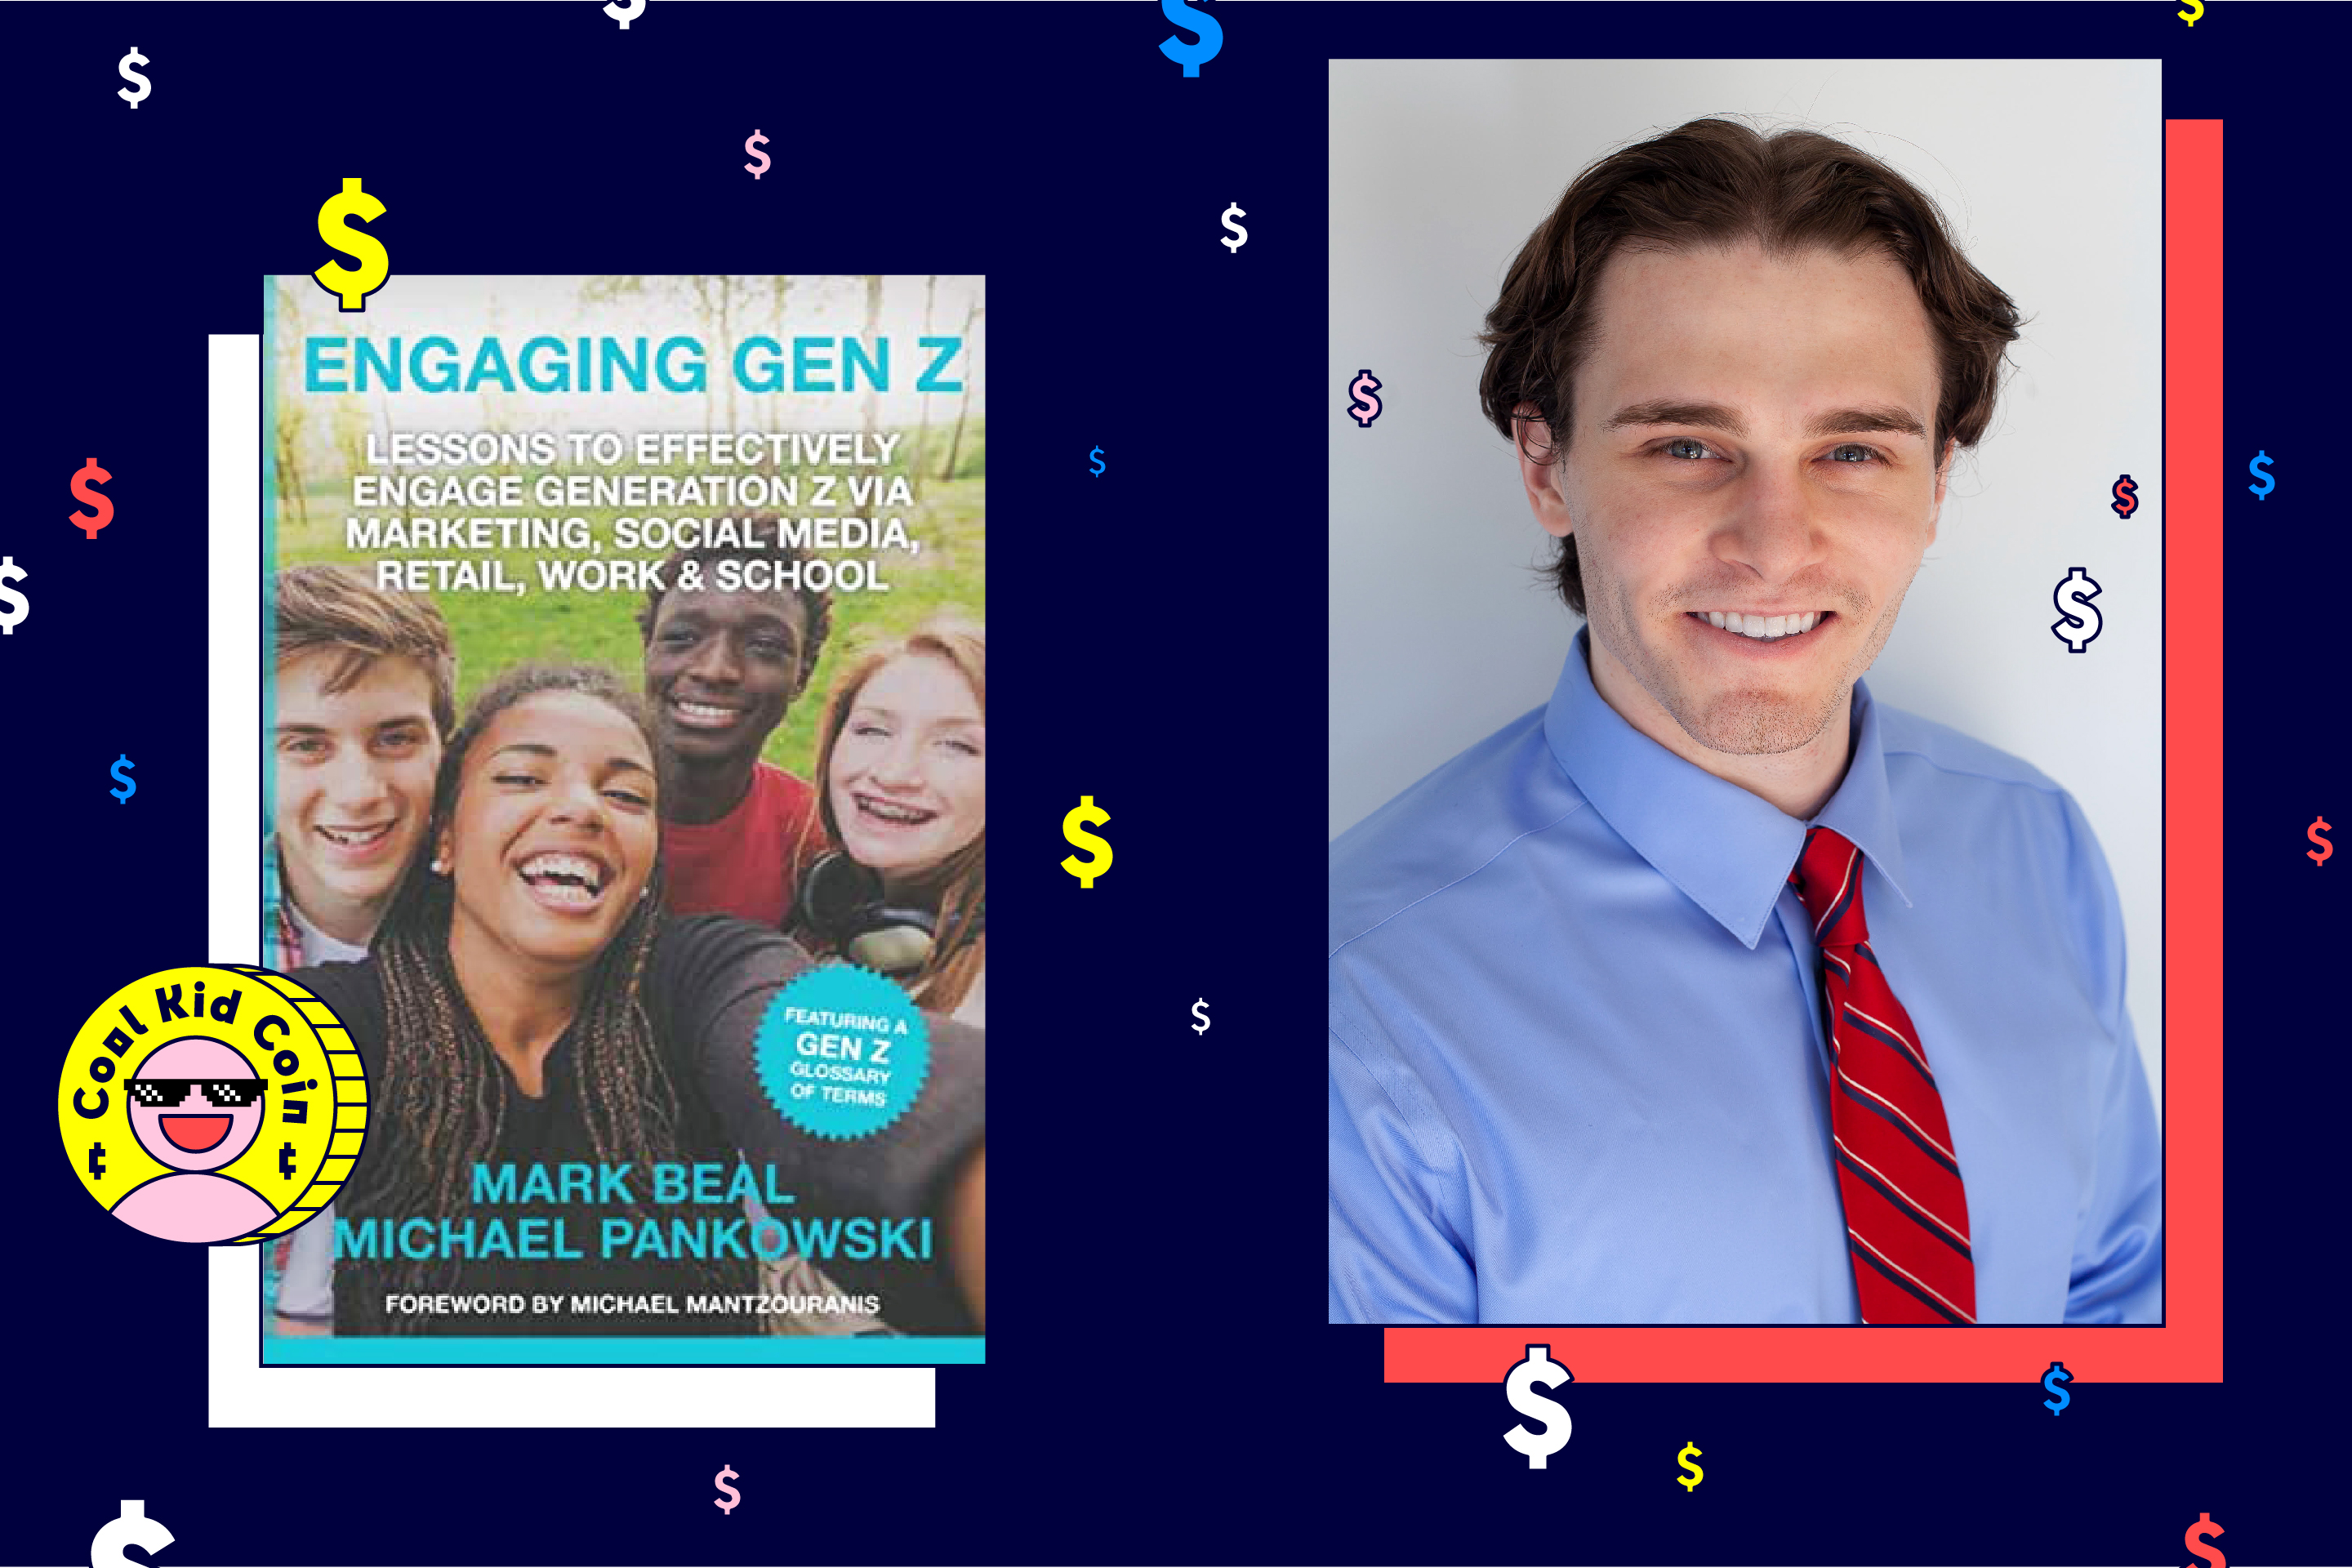 Portrait of Michael Pankowski along with Engaging Gen Z Book Cover